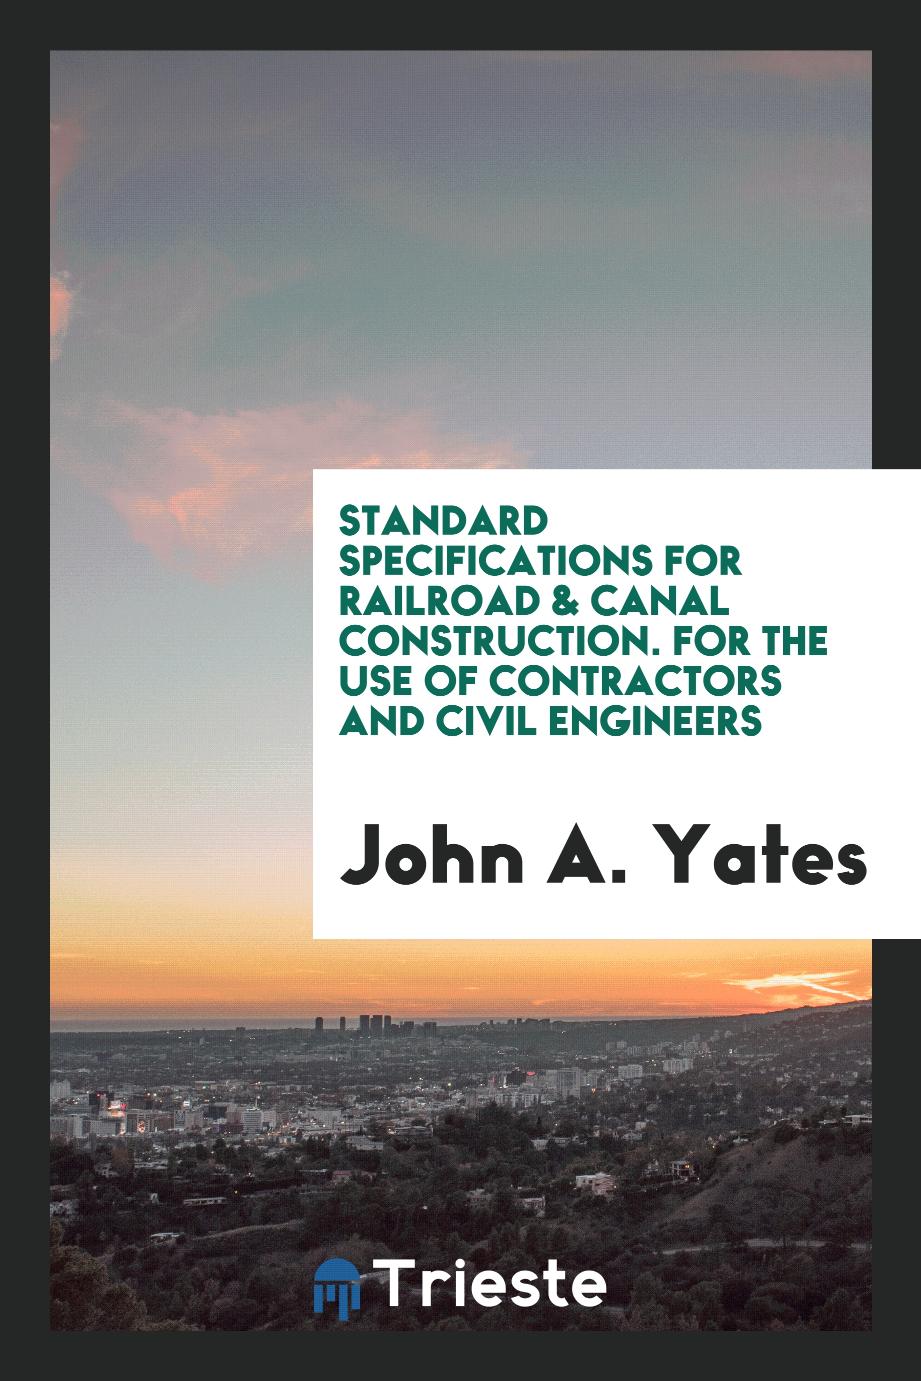 Standard Specifications for Railroad & Canal Construction. For the Use of Contractors and Civil Engineers